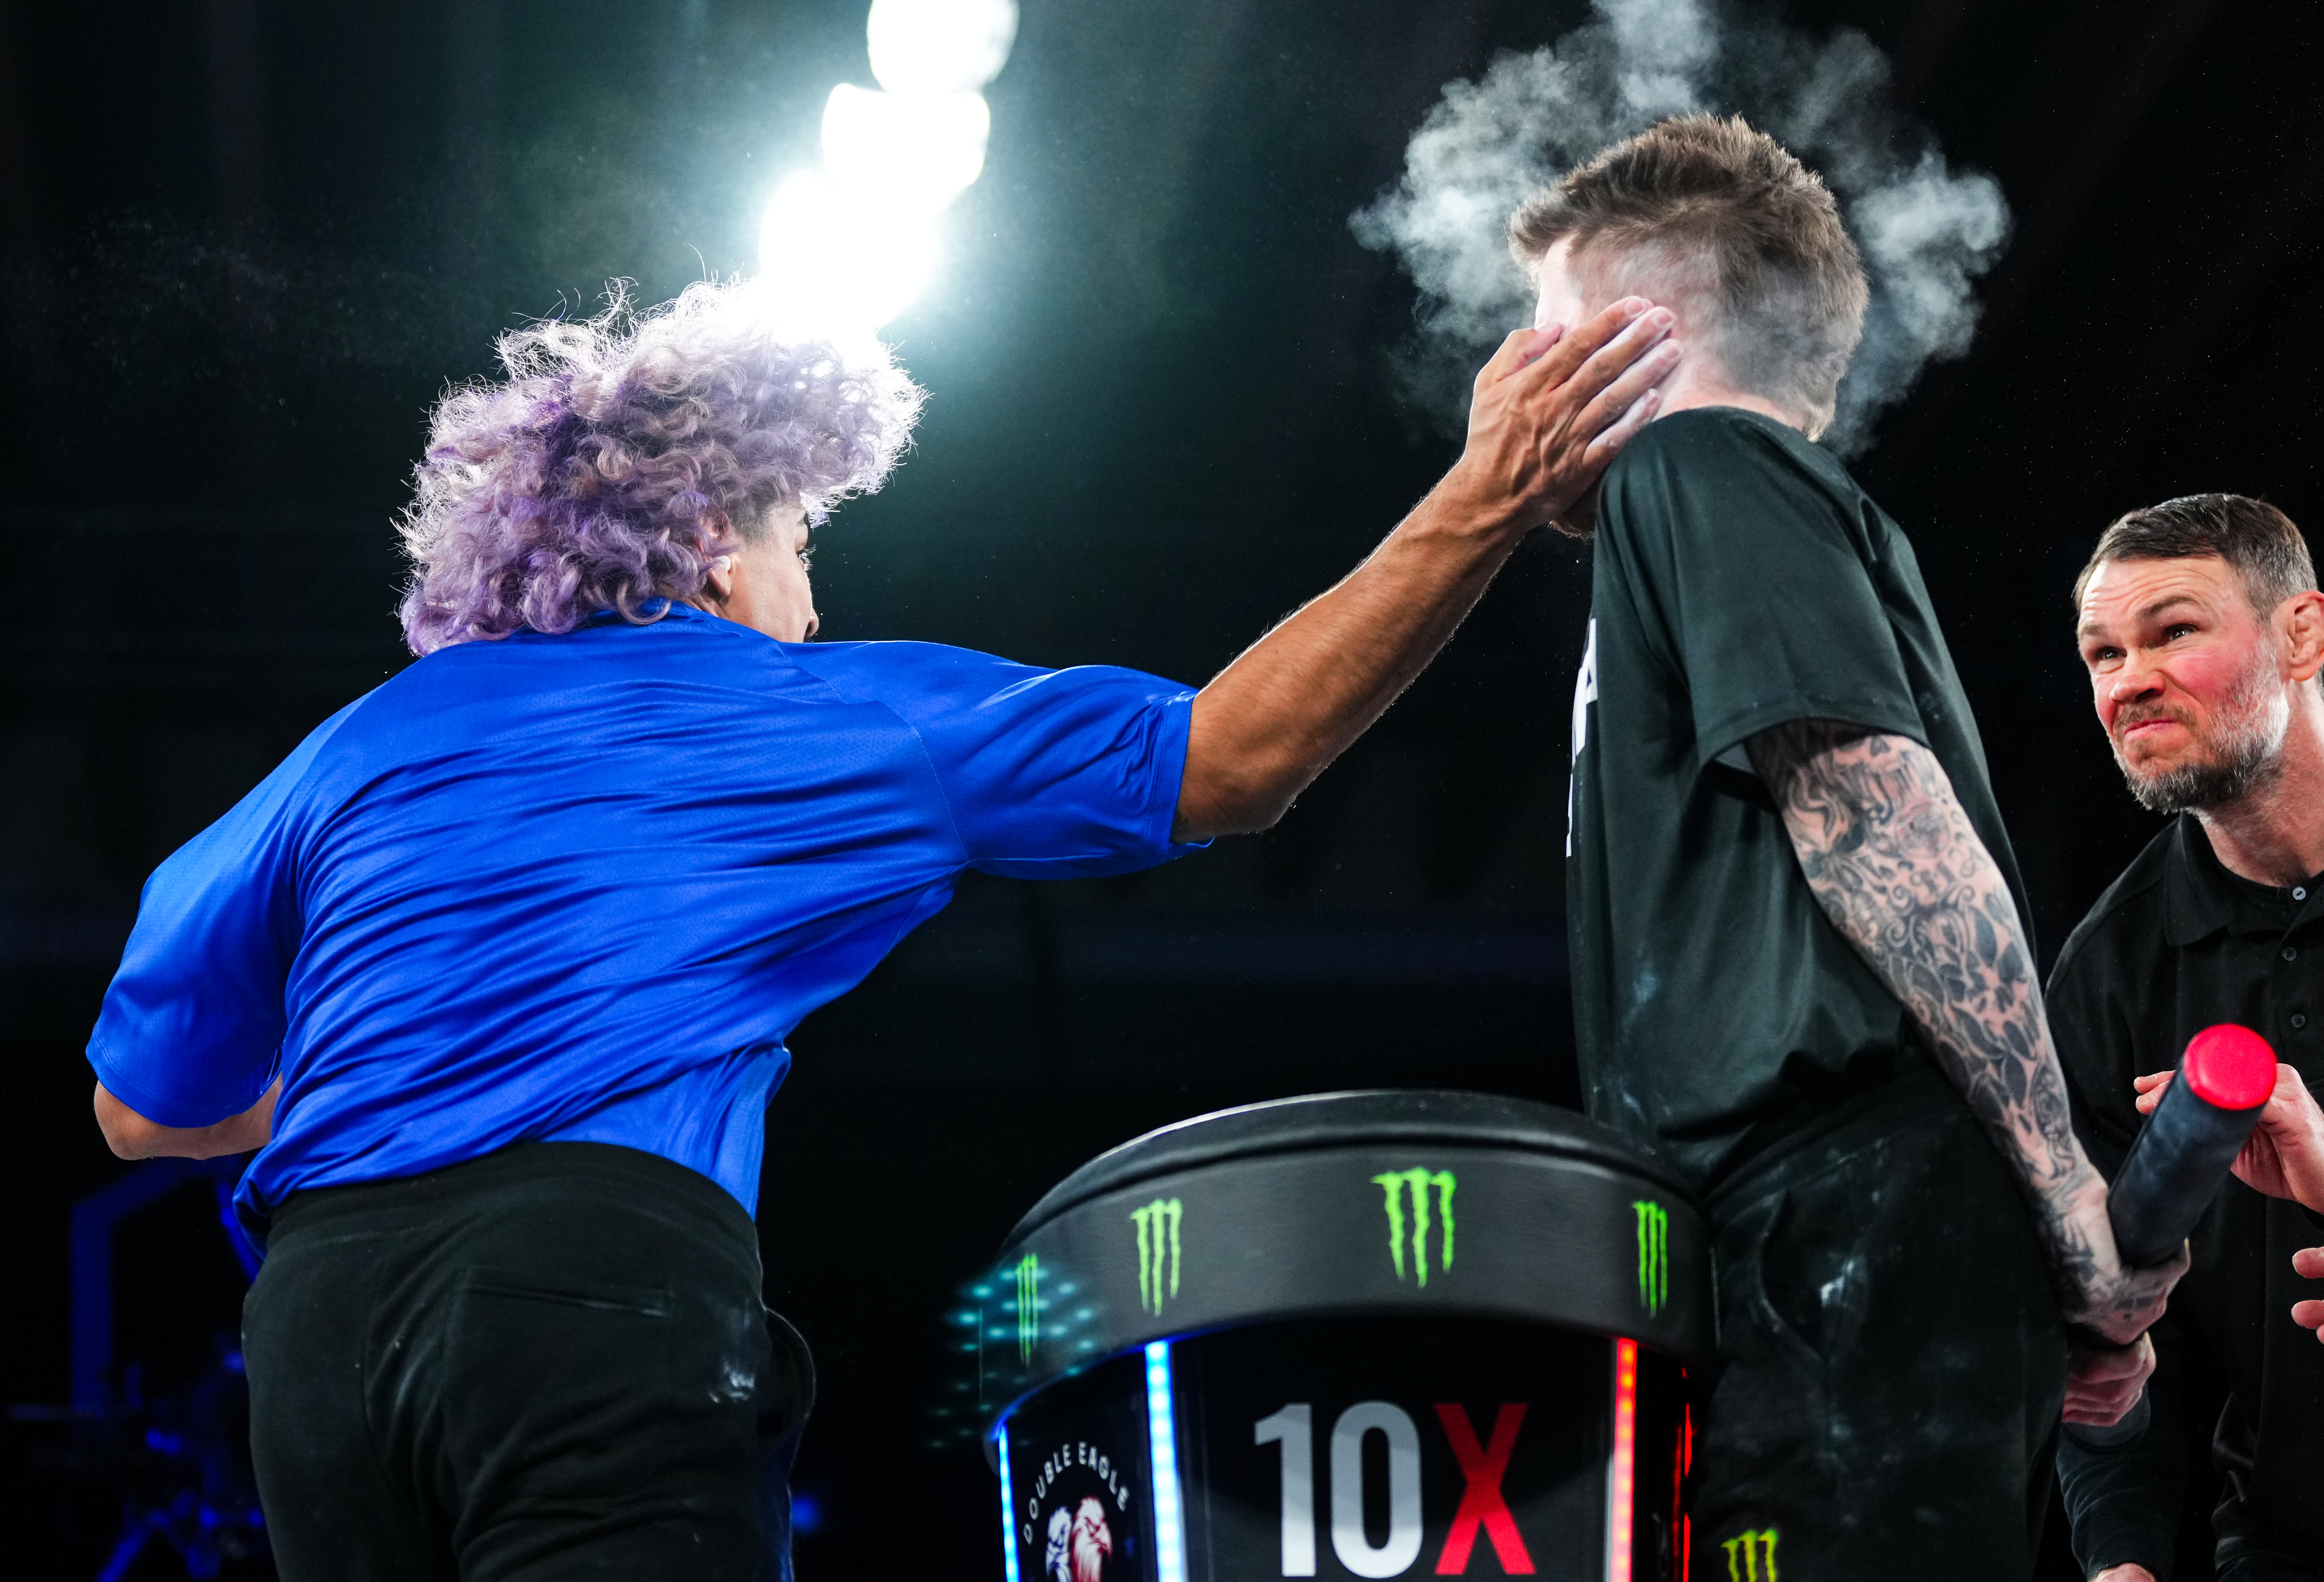 Power Slap 6: A Thrilling Night of Action and Surprises